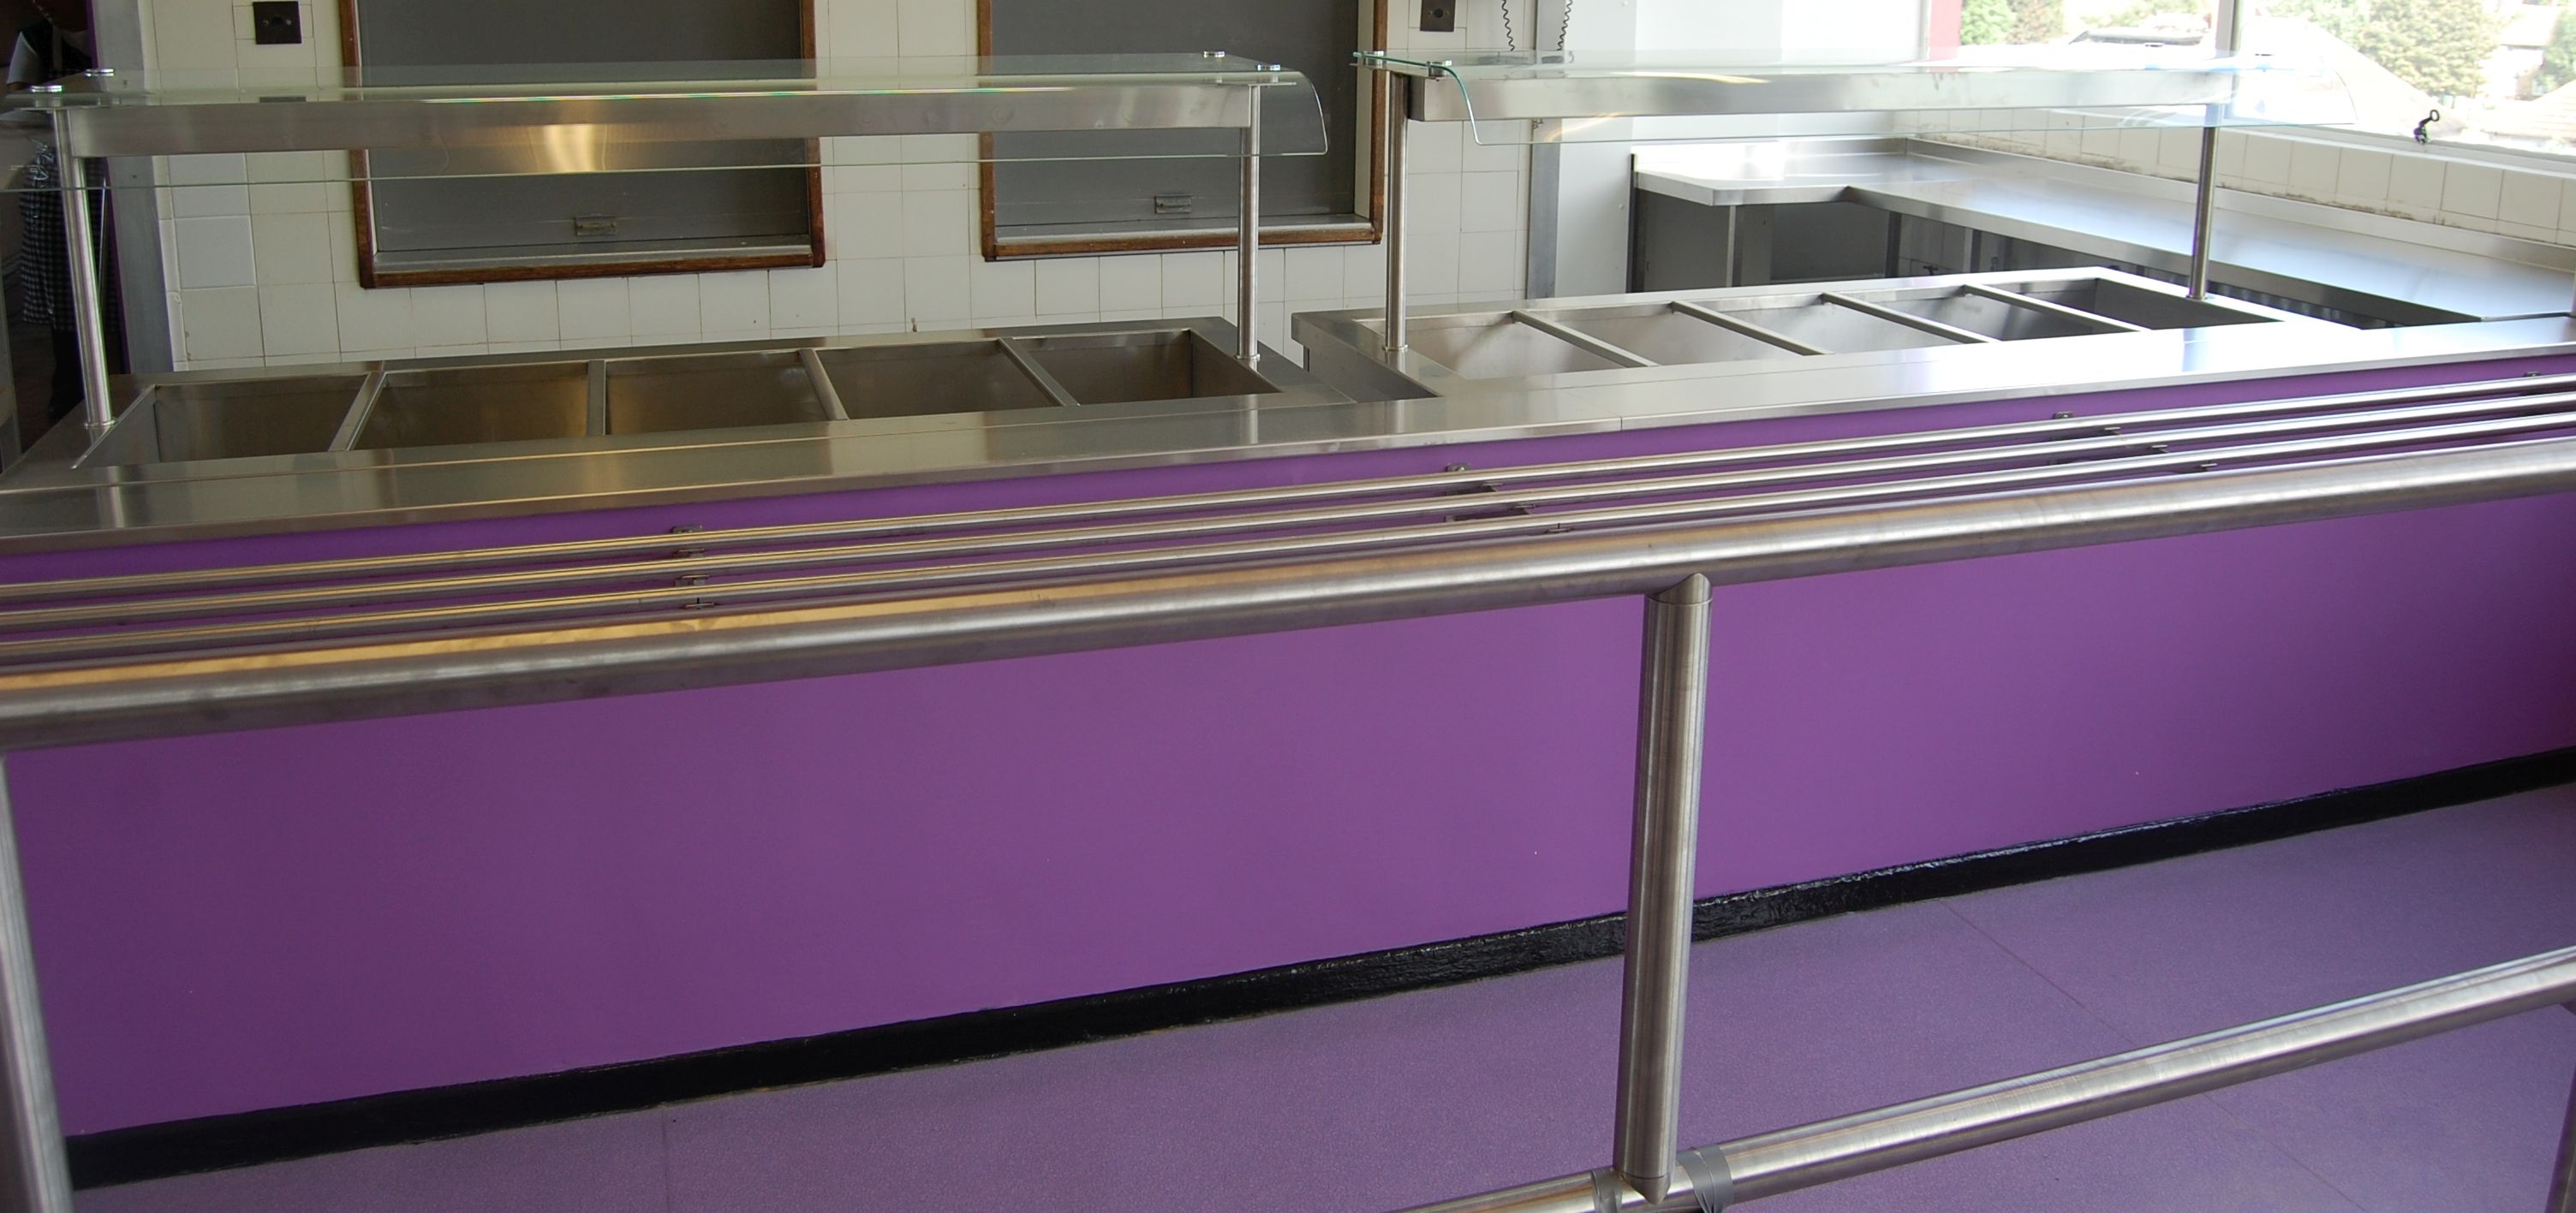 Servery Hot Cupbopards